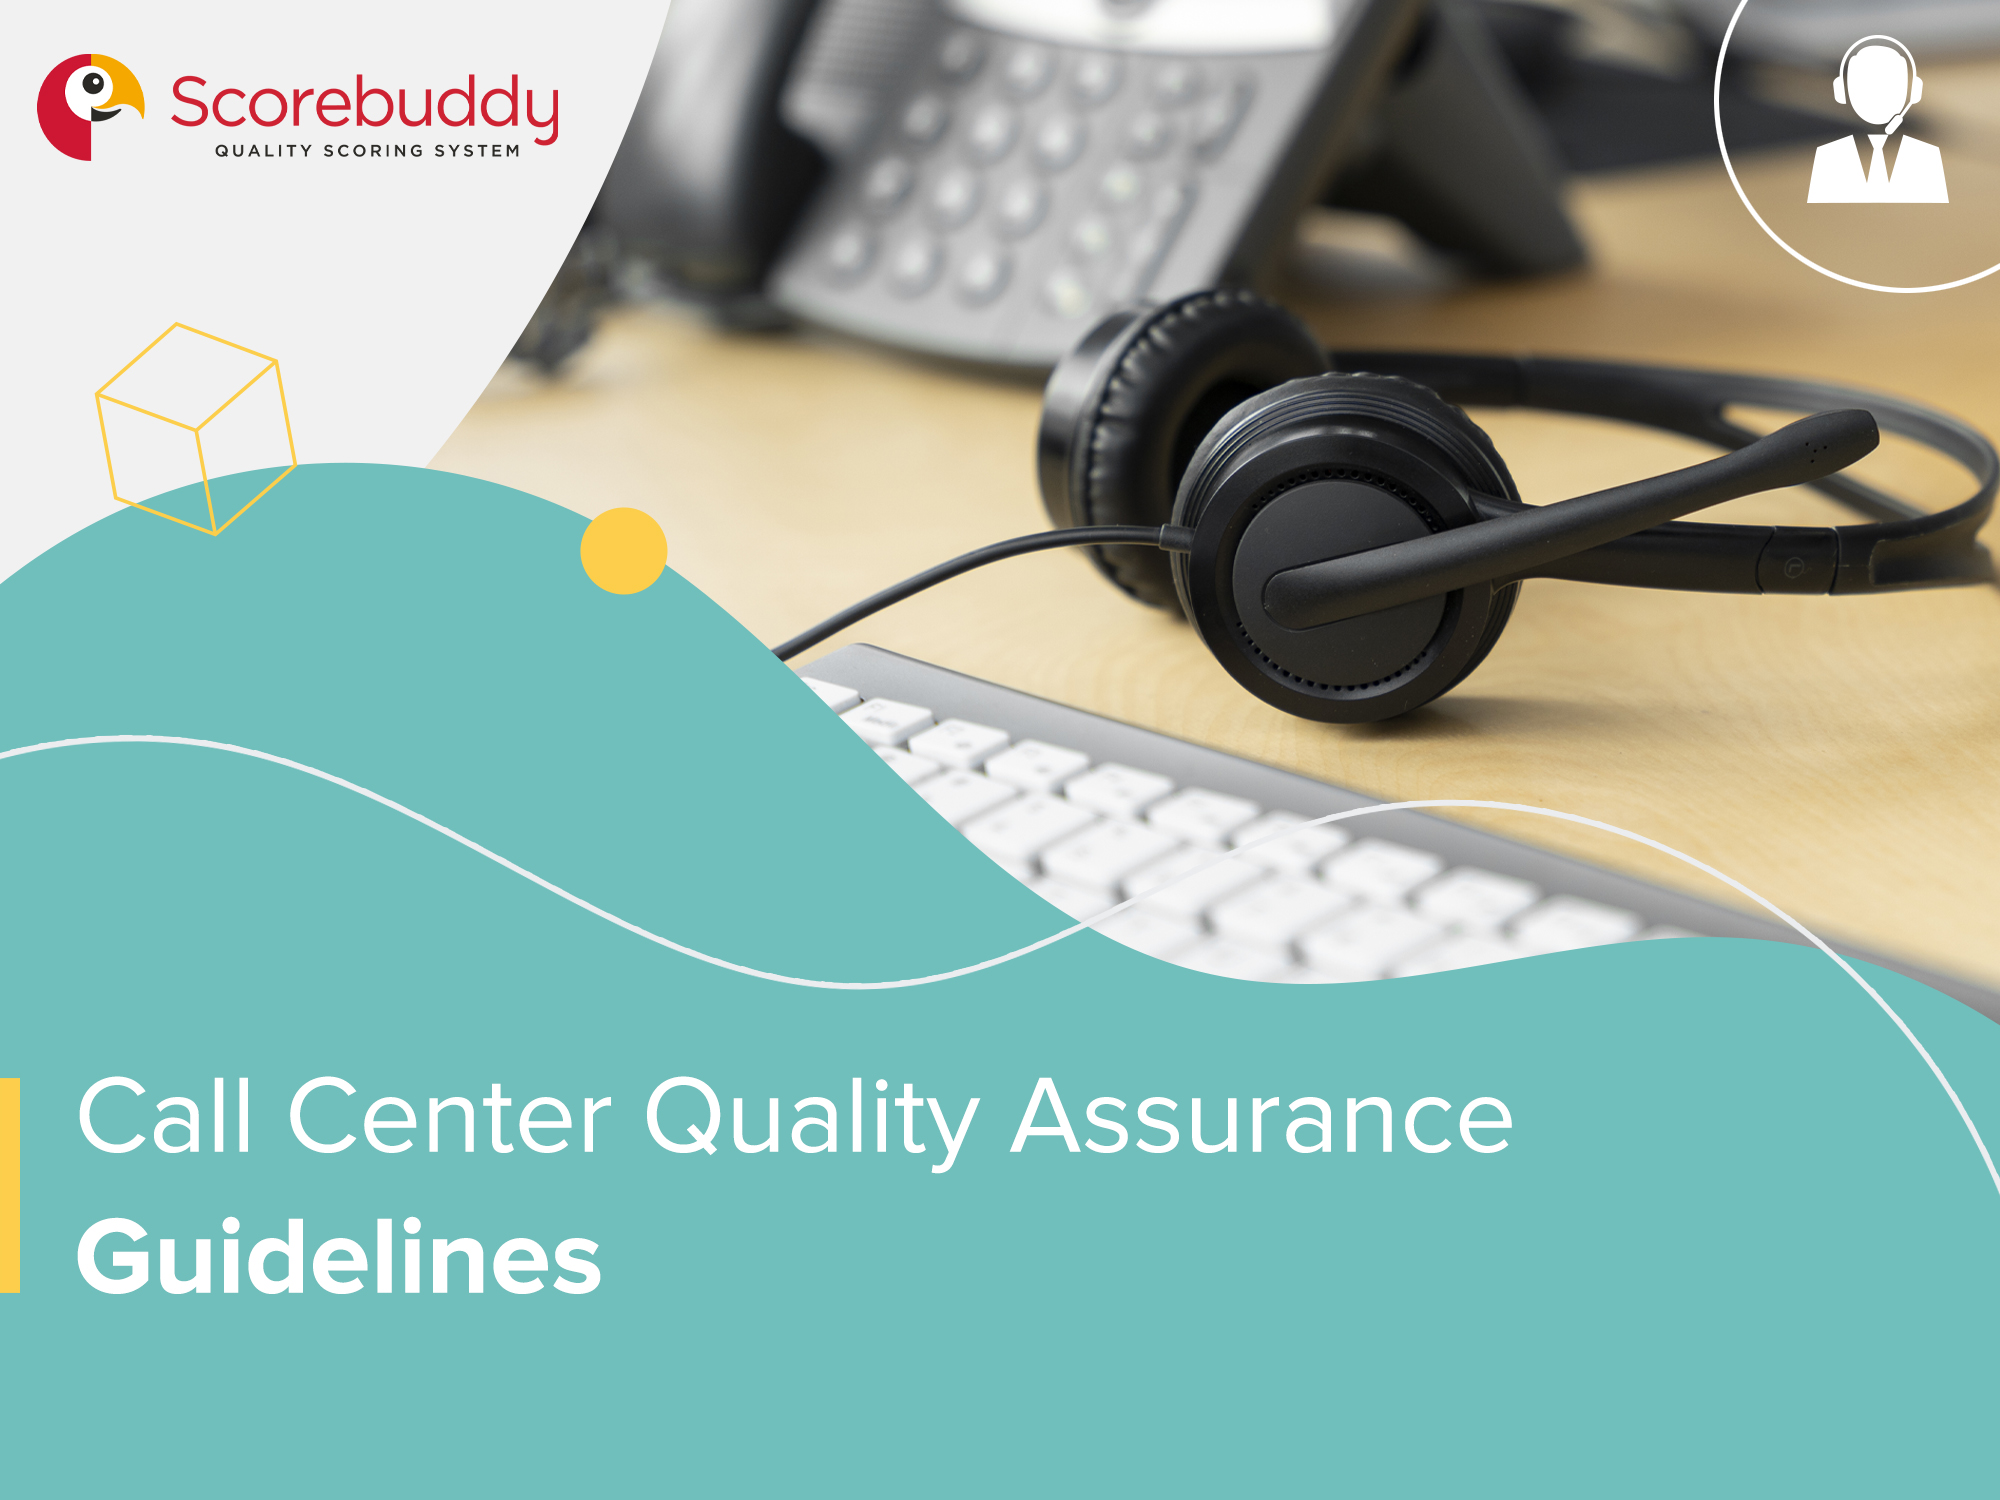 Call Center Quality Assurance Guidelines